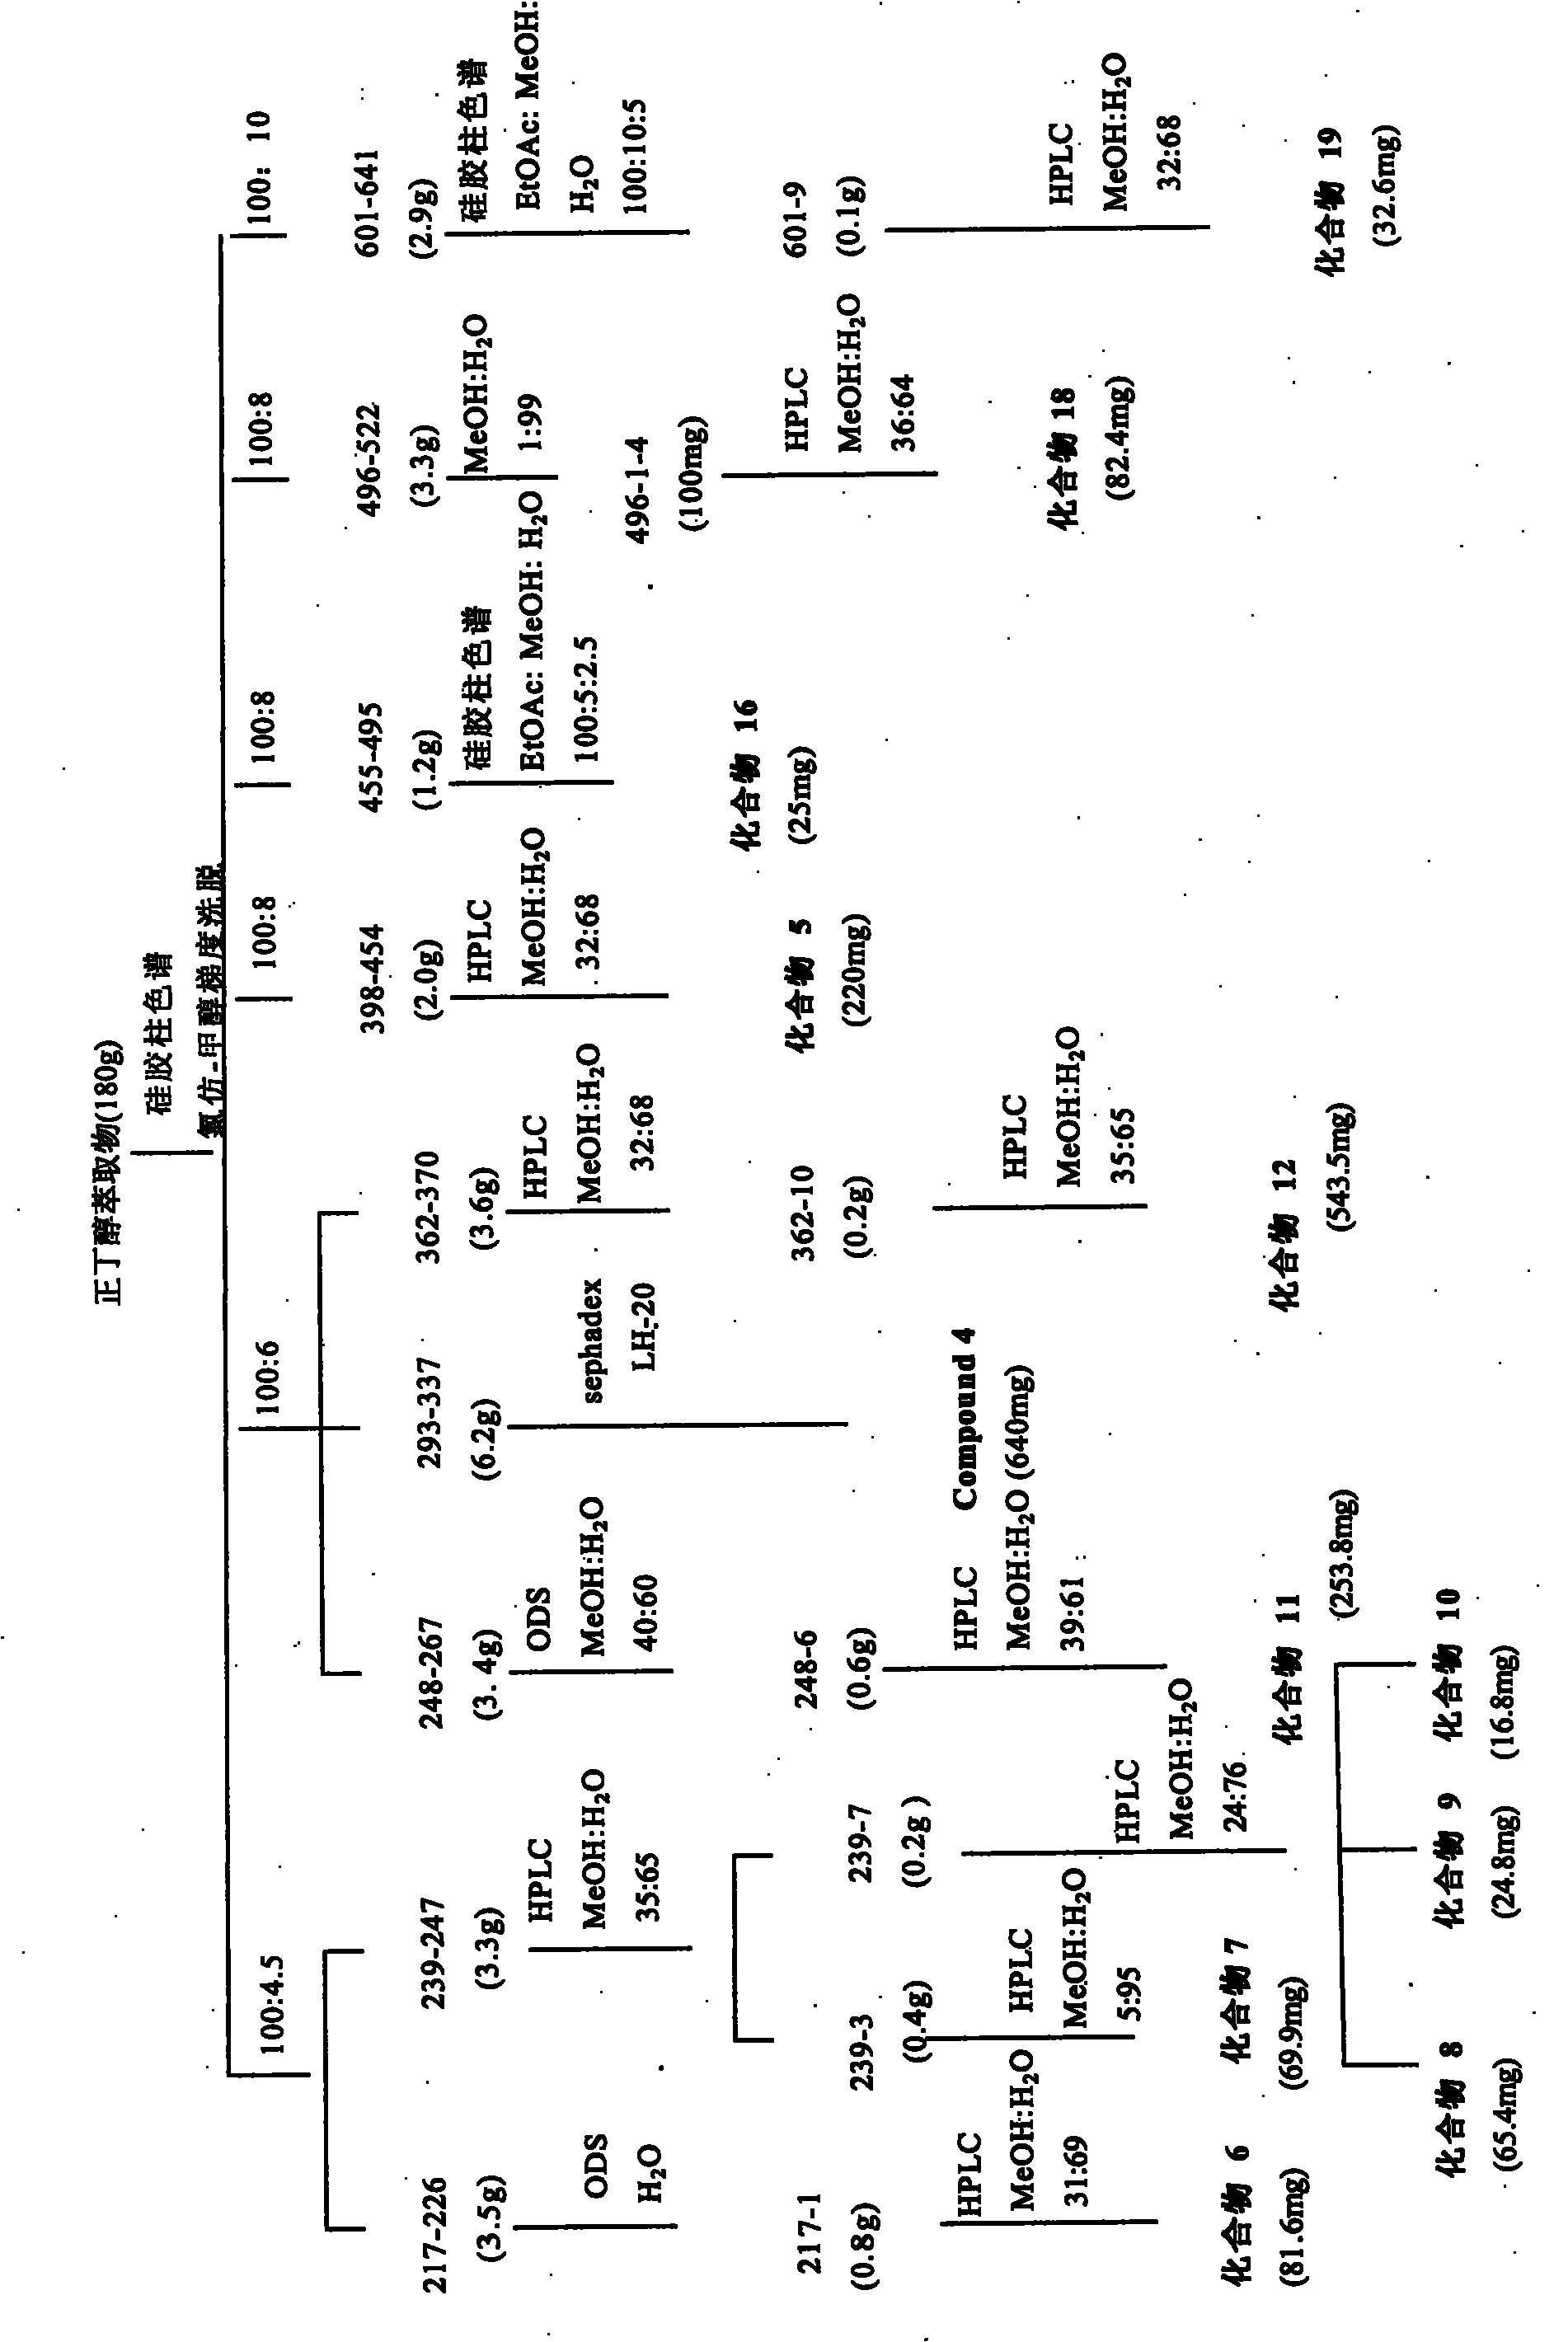 Total glycosides of Rhodiola rosea, medical application and preparation method thereof